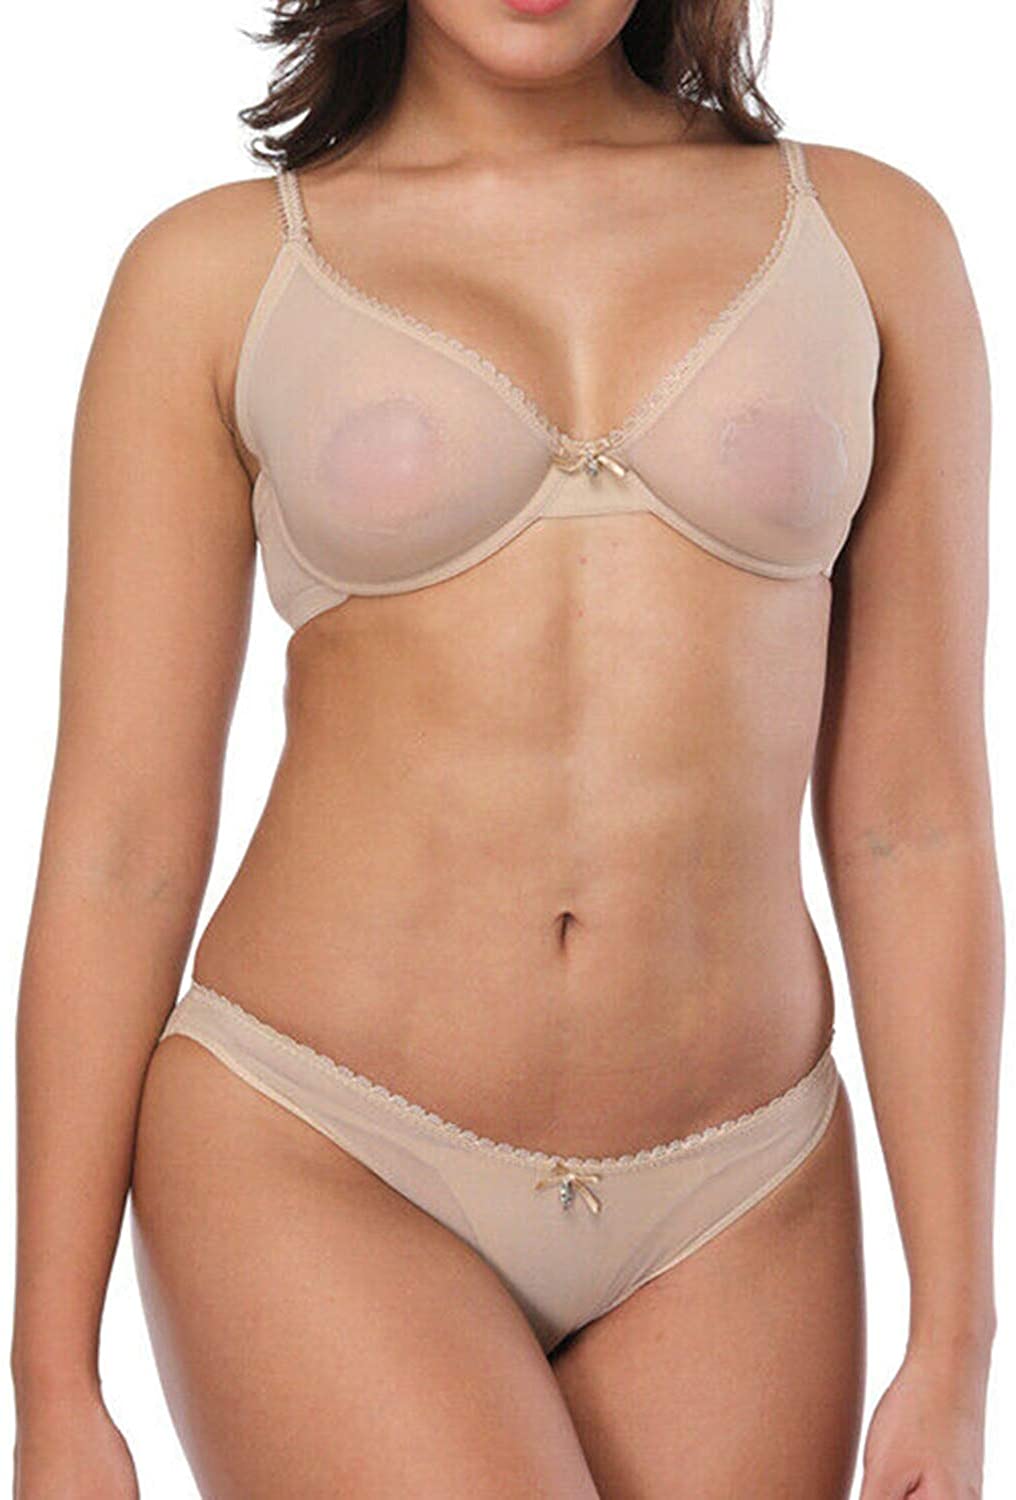 Sheer See Through Bras and Panties Set Unlined Mesh Sexy Lace for Women  Plus Siz